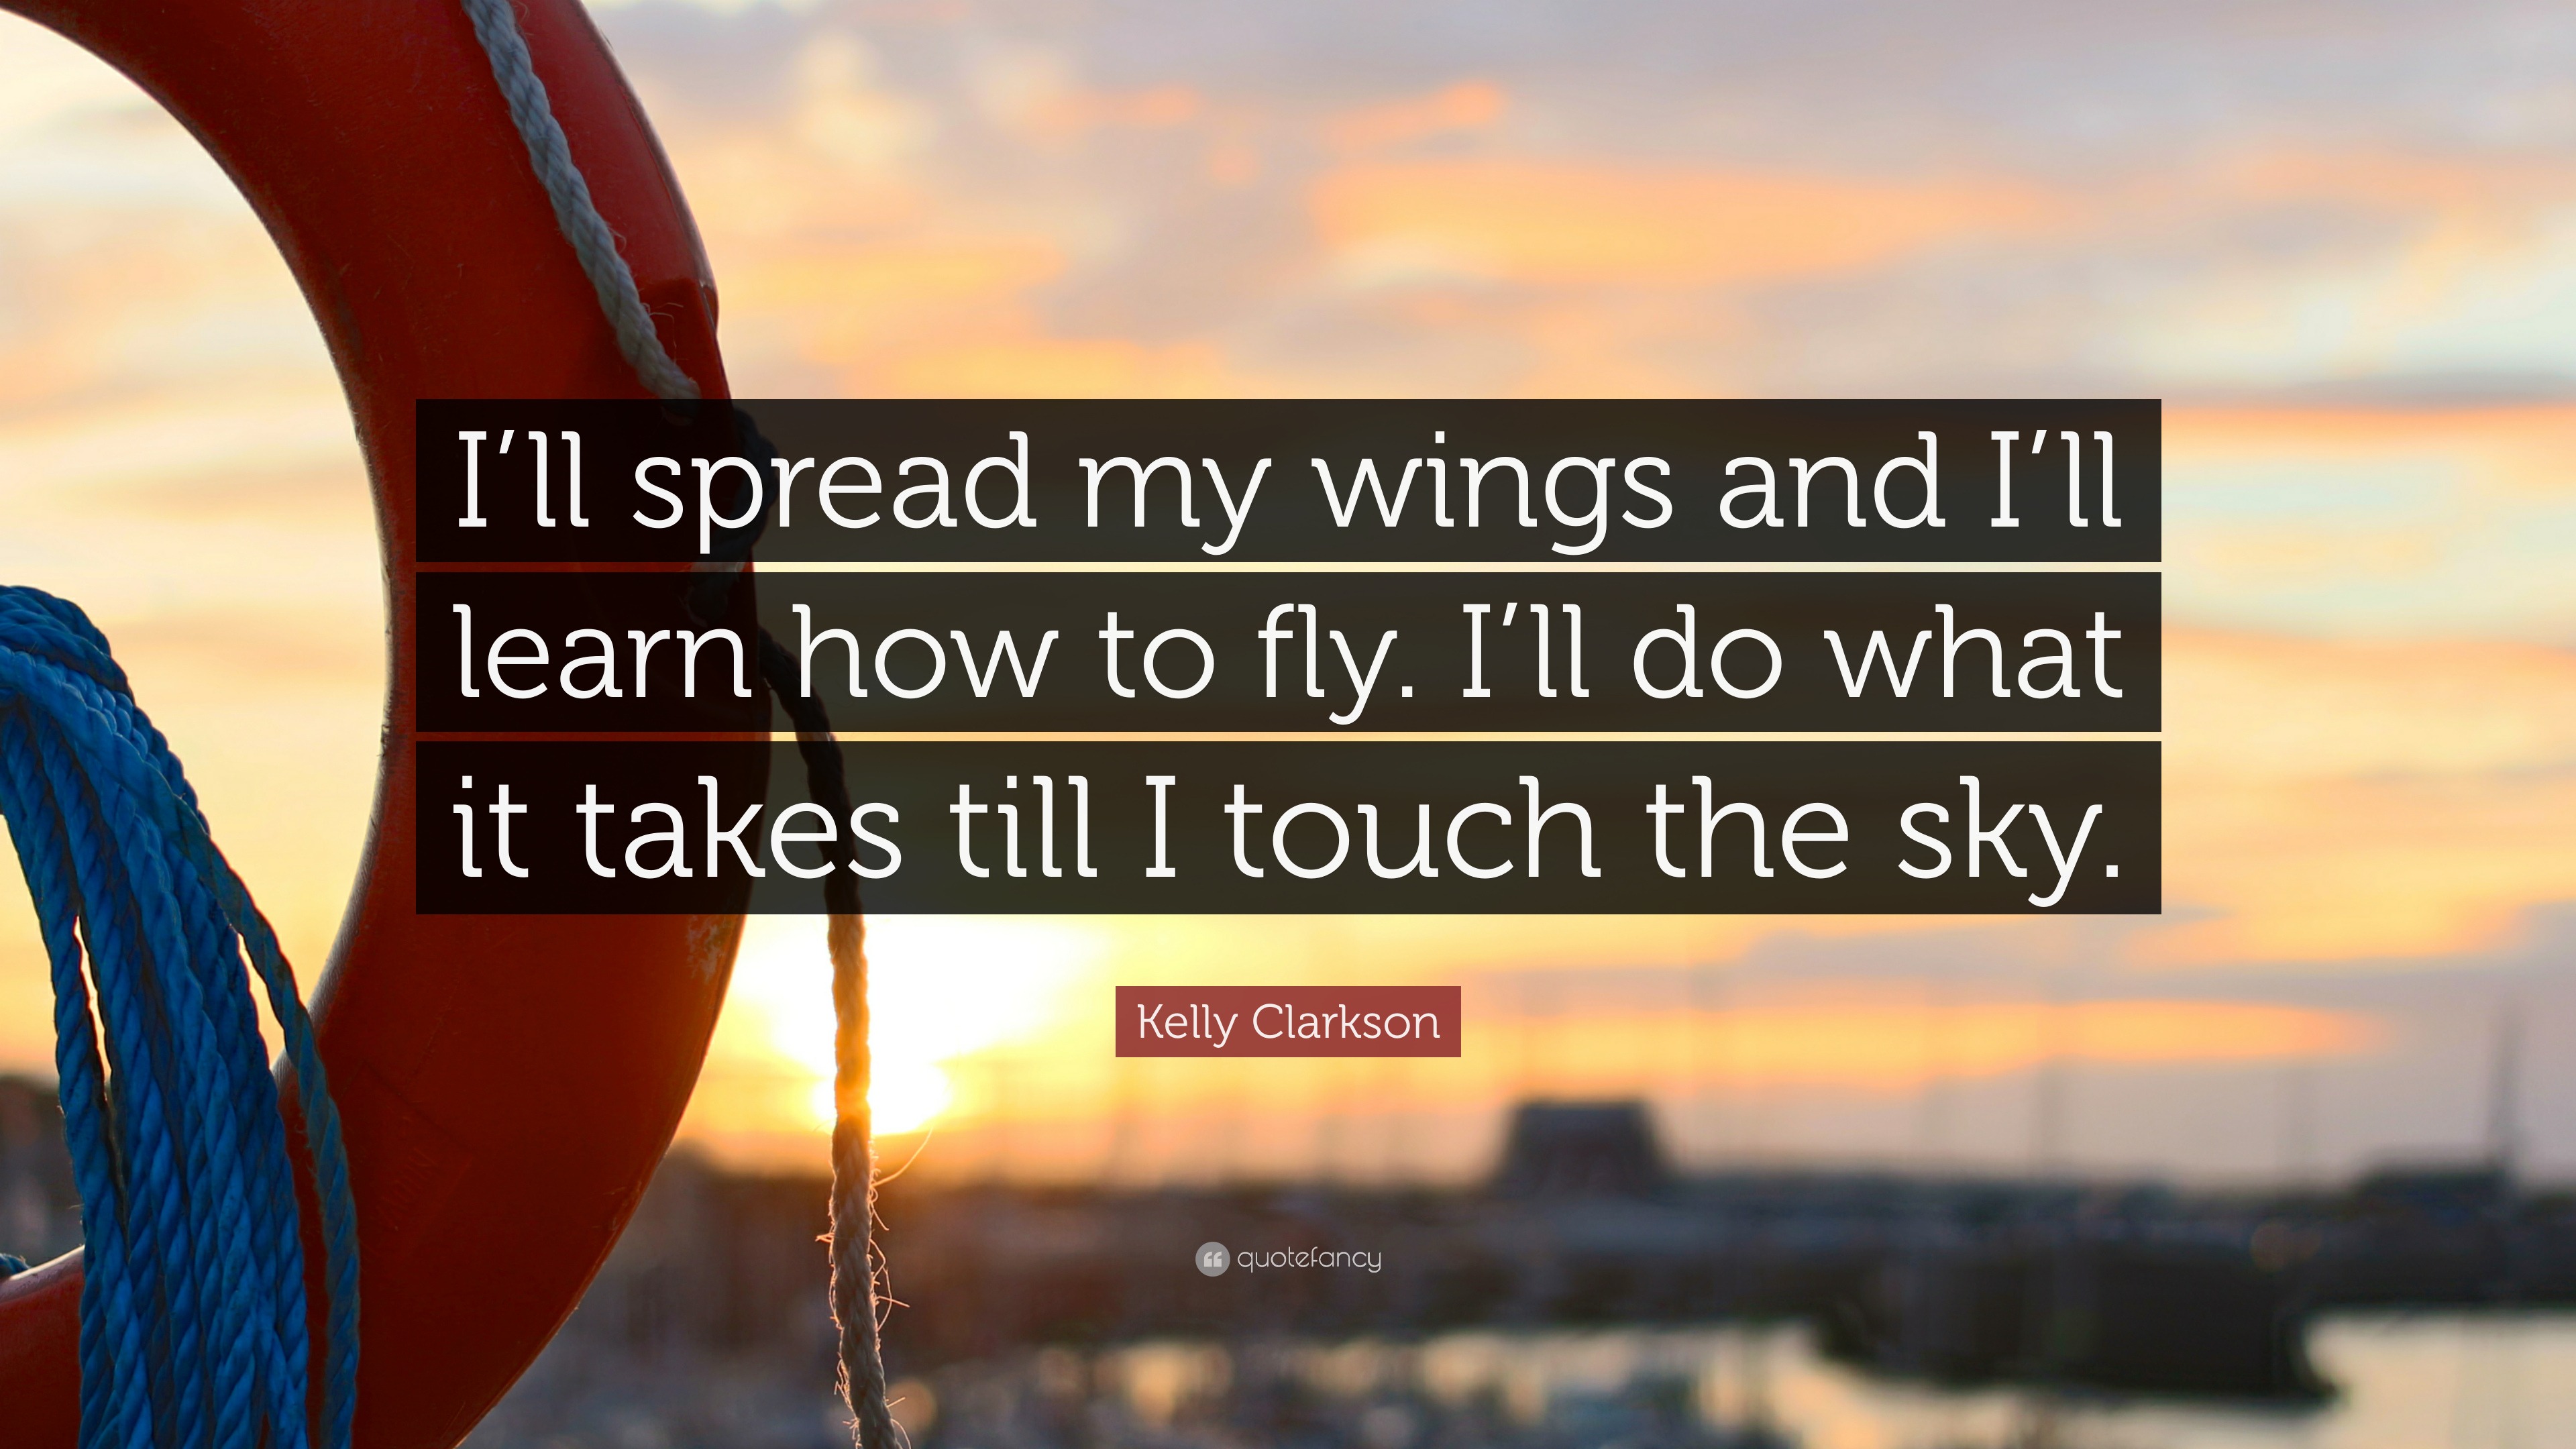 Kelly Clarkson Quote: “I'll Spread My Wings And I'll Learn How To Fly. I'